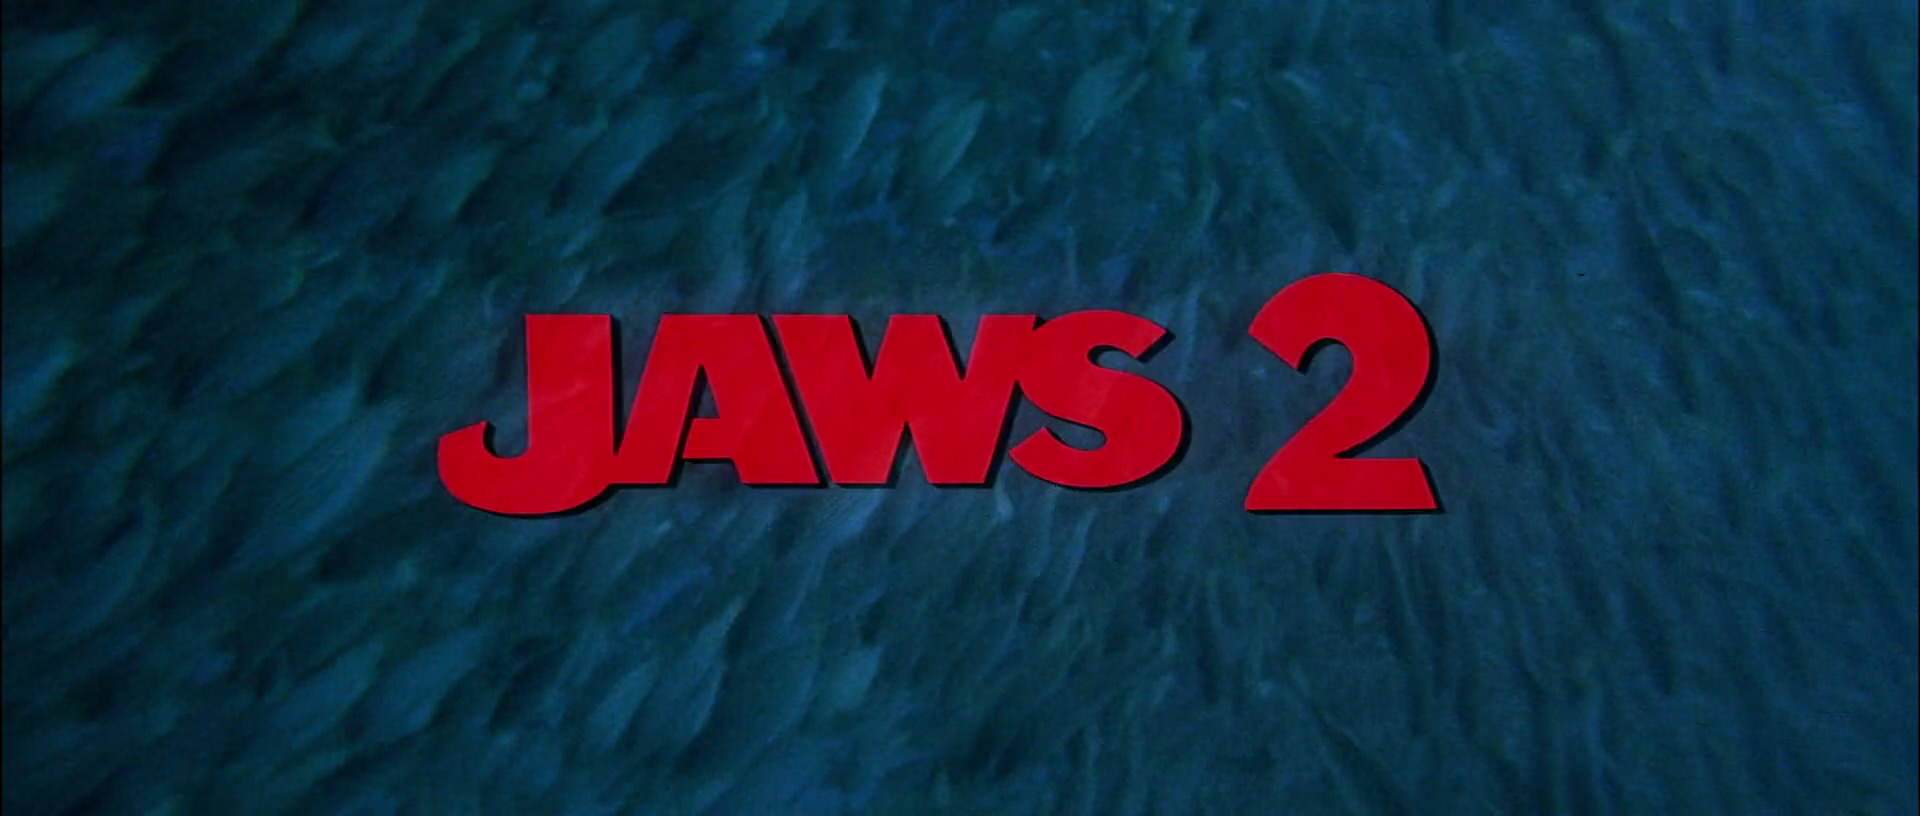 jaws full movie online free no download